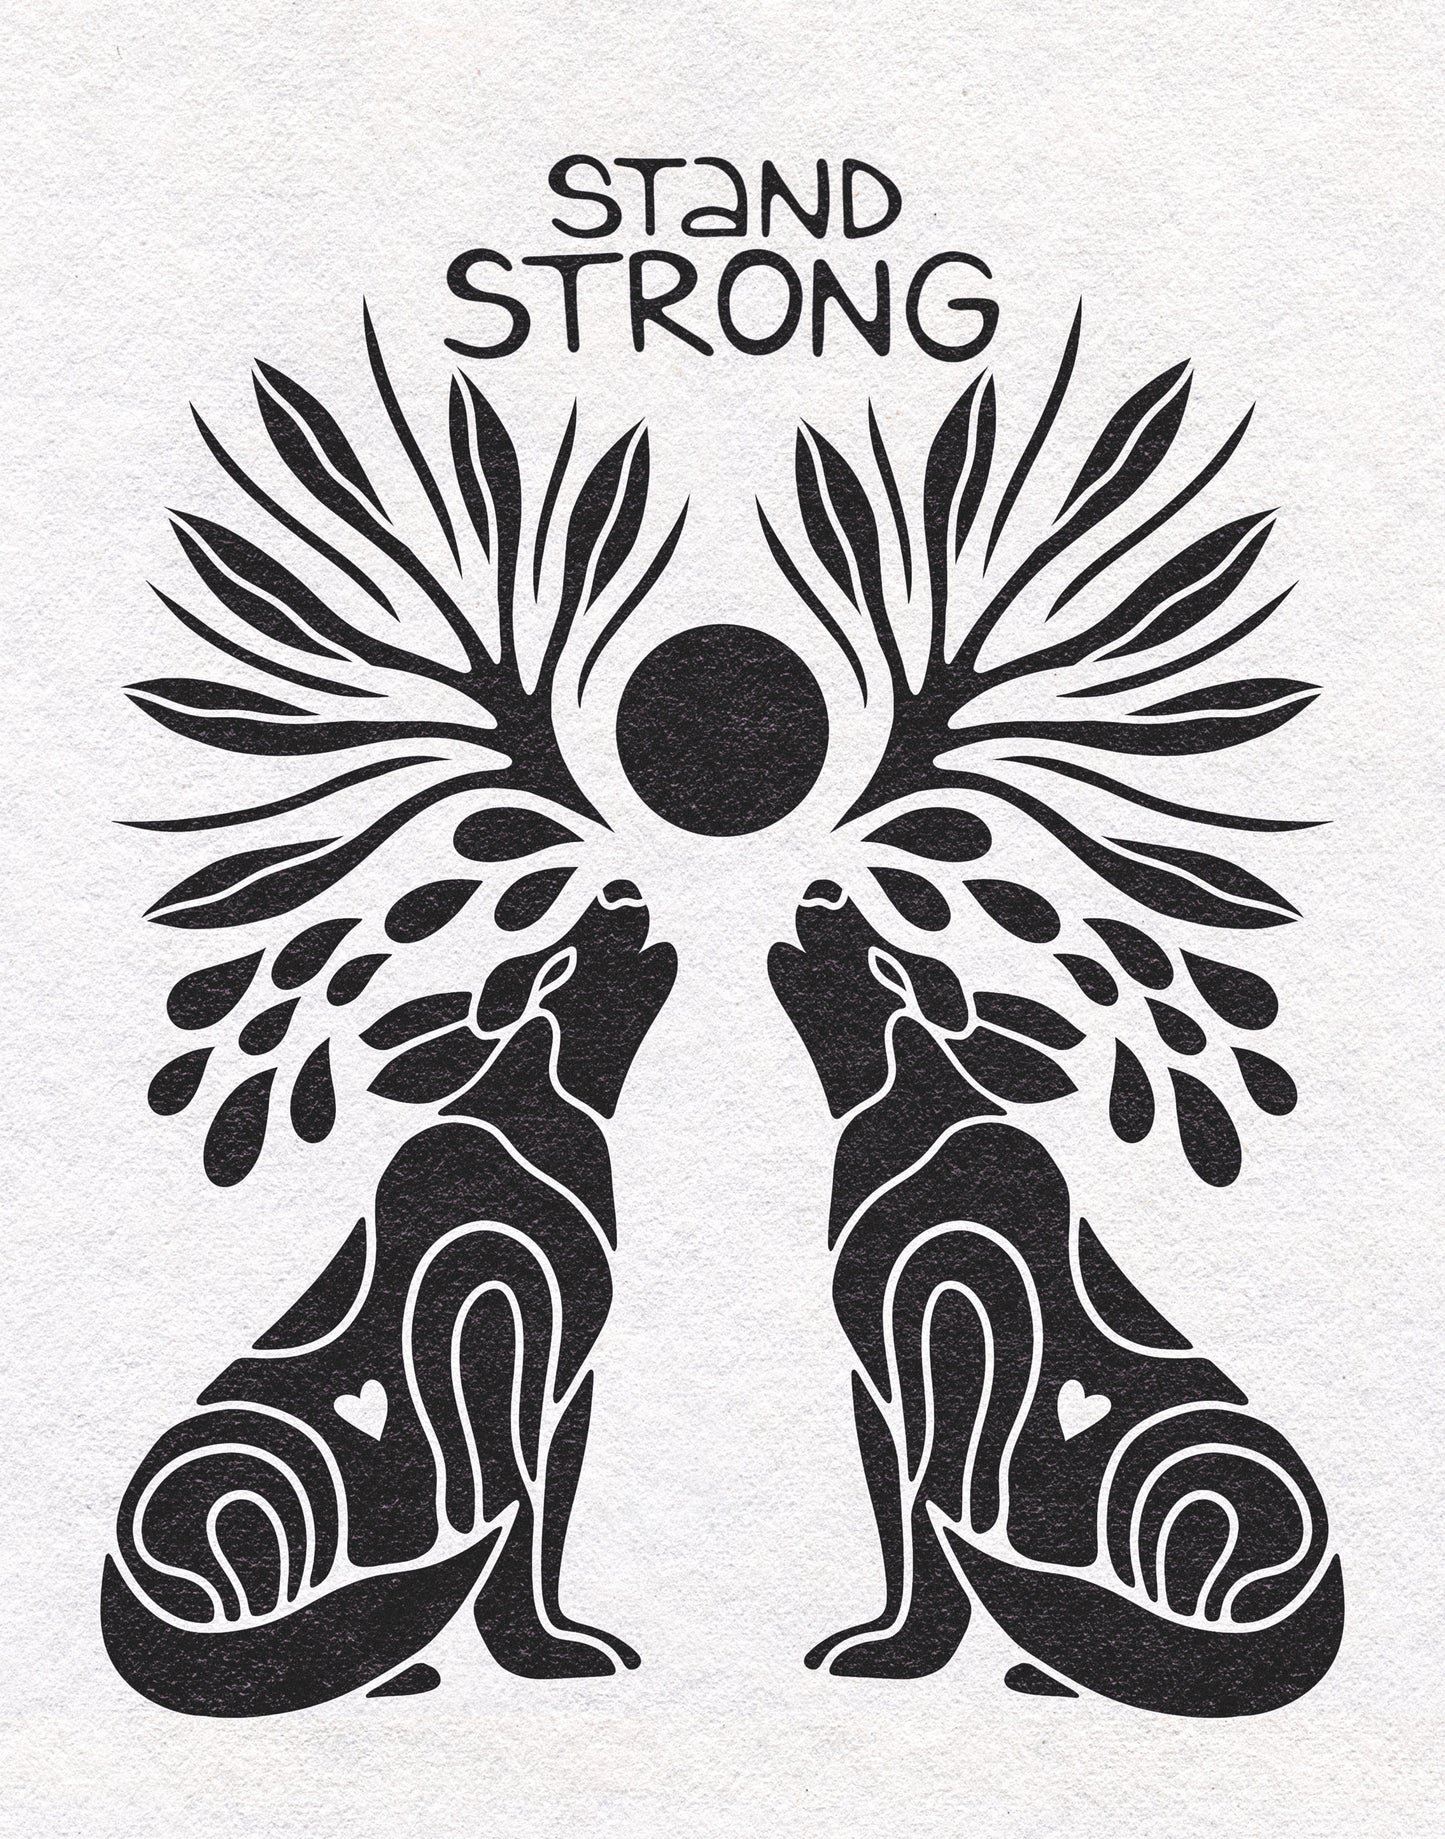 "Stand Strong" Print